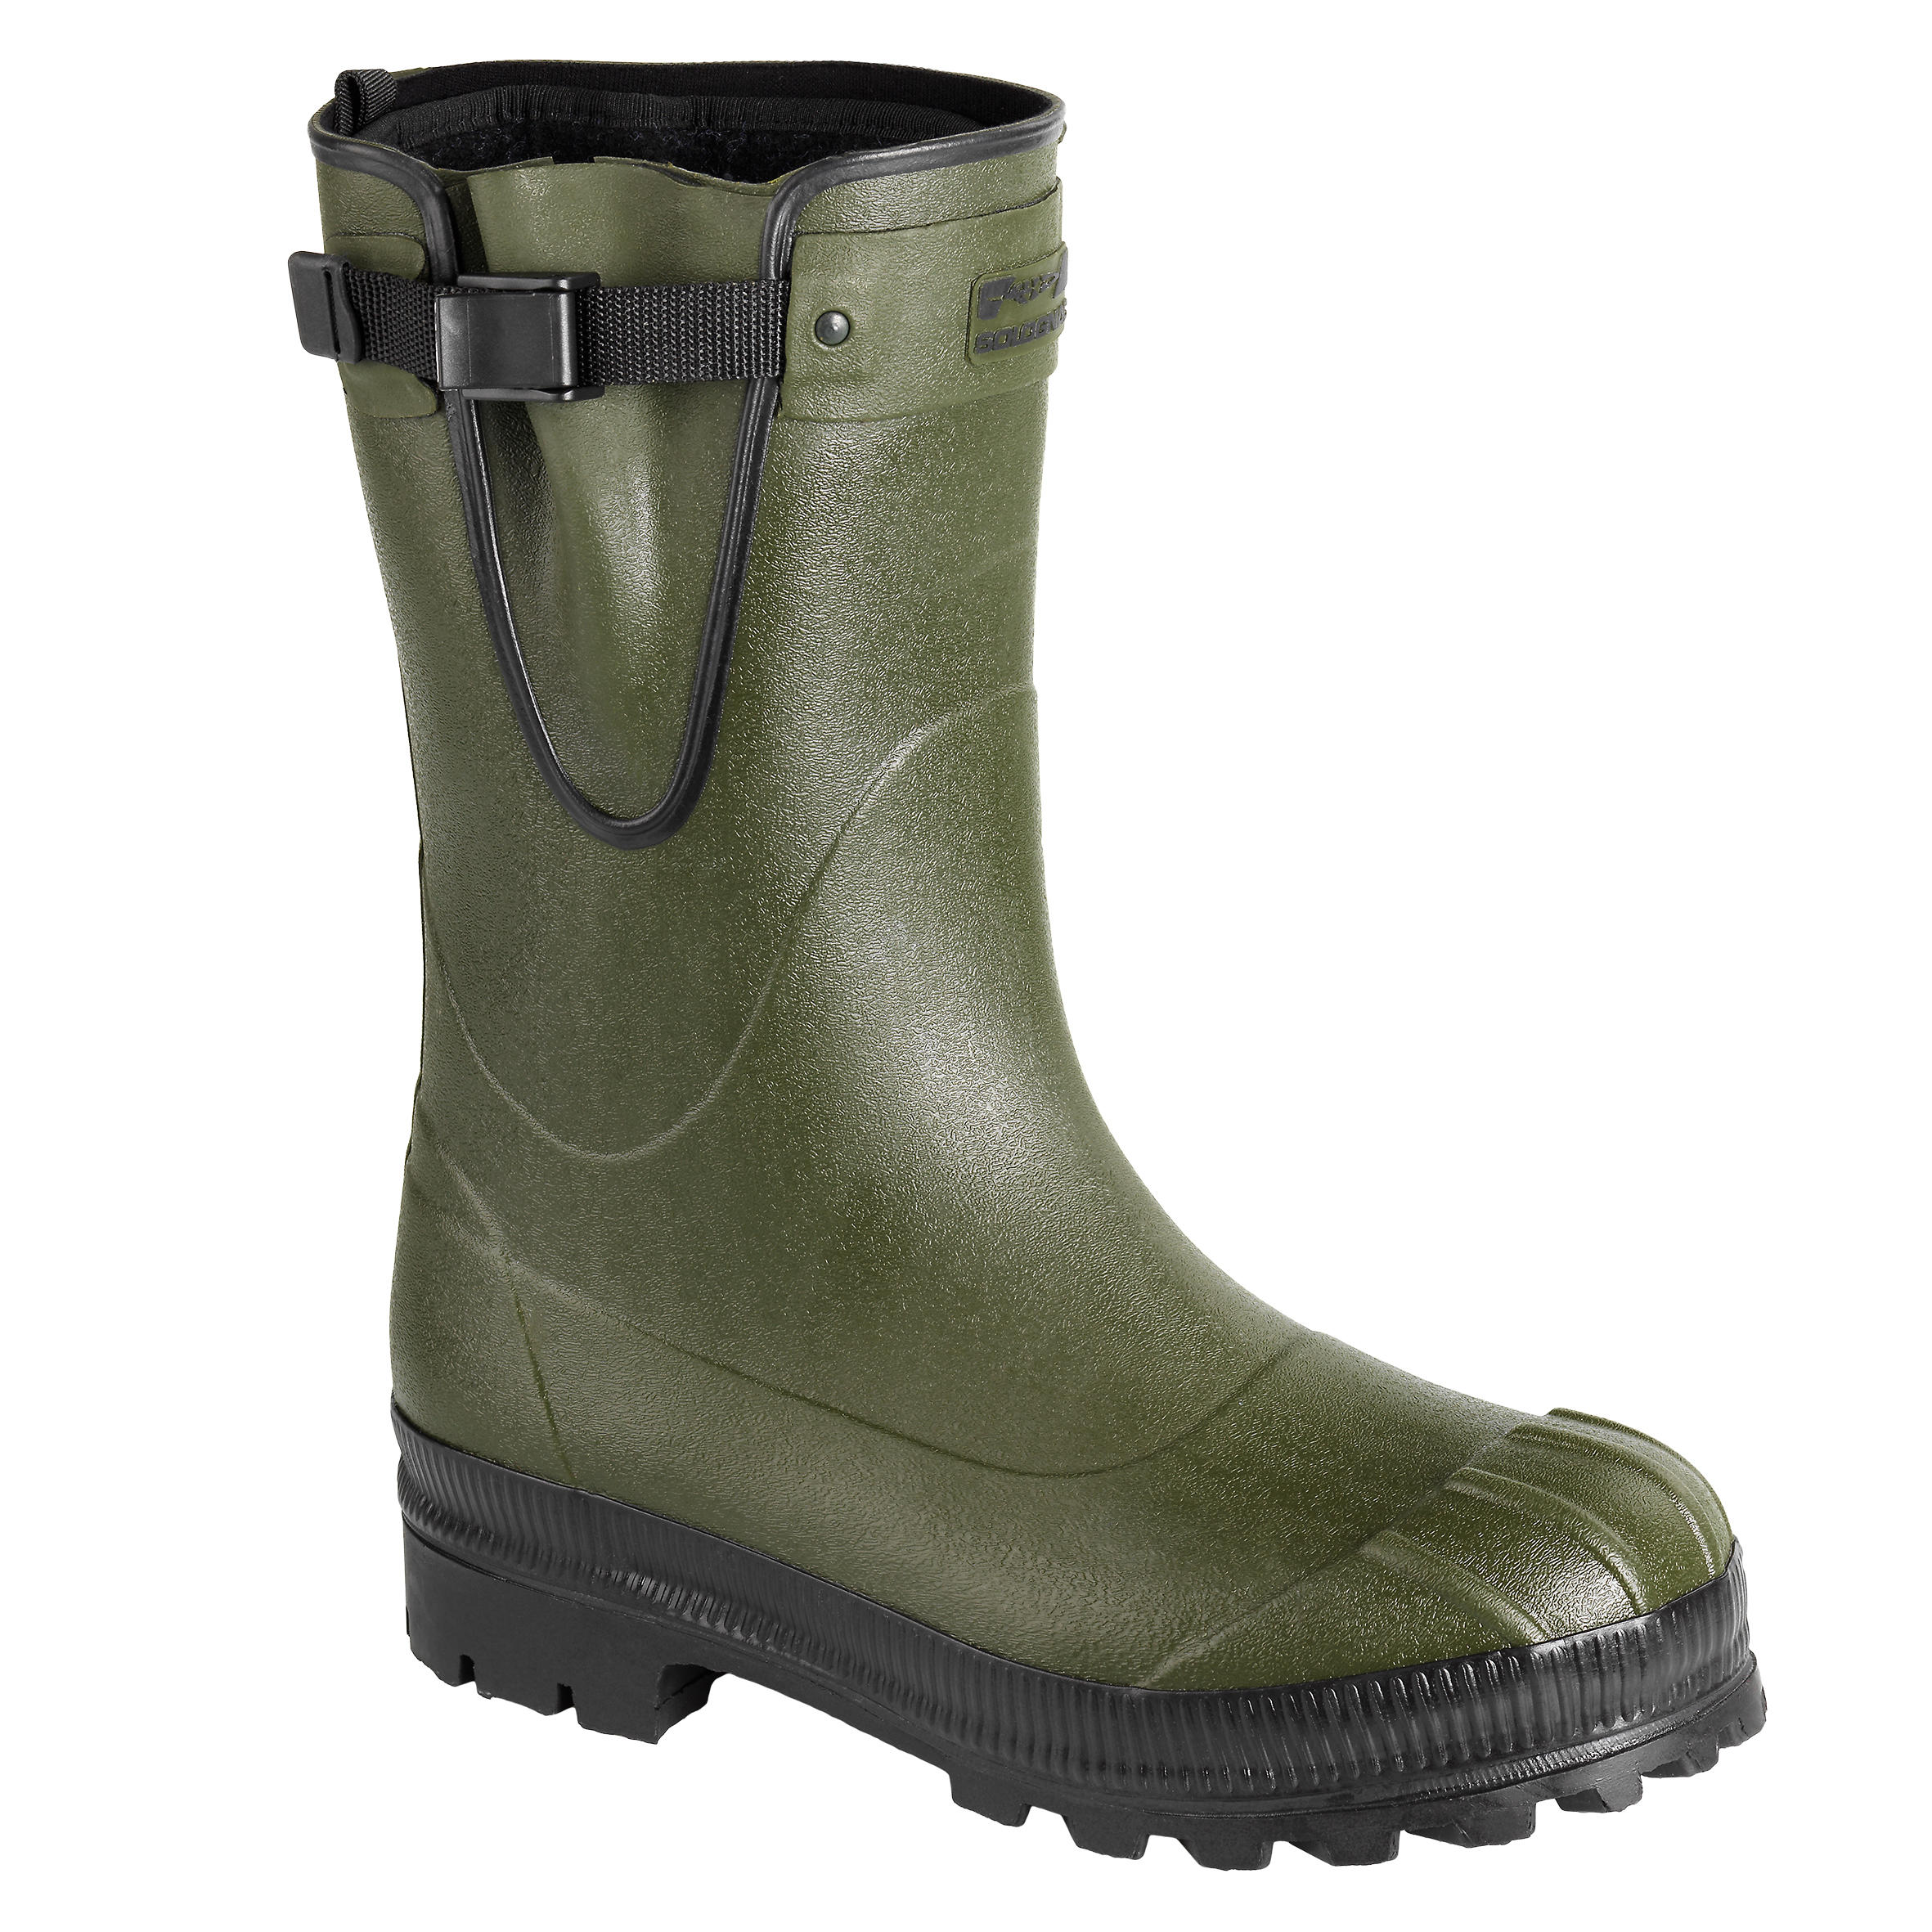 Toundra 500 short wellies with removable liner - Green 1/8